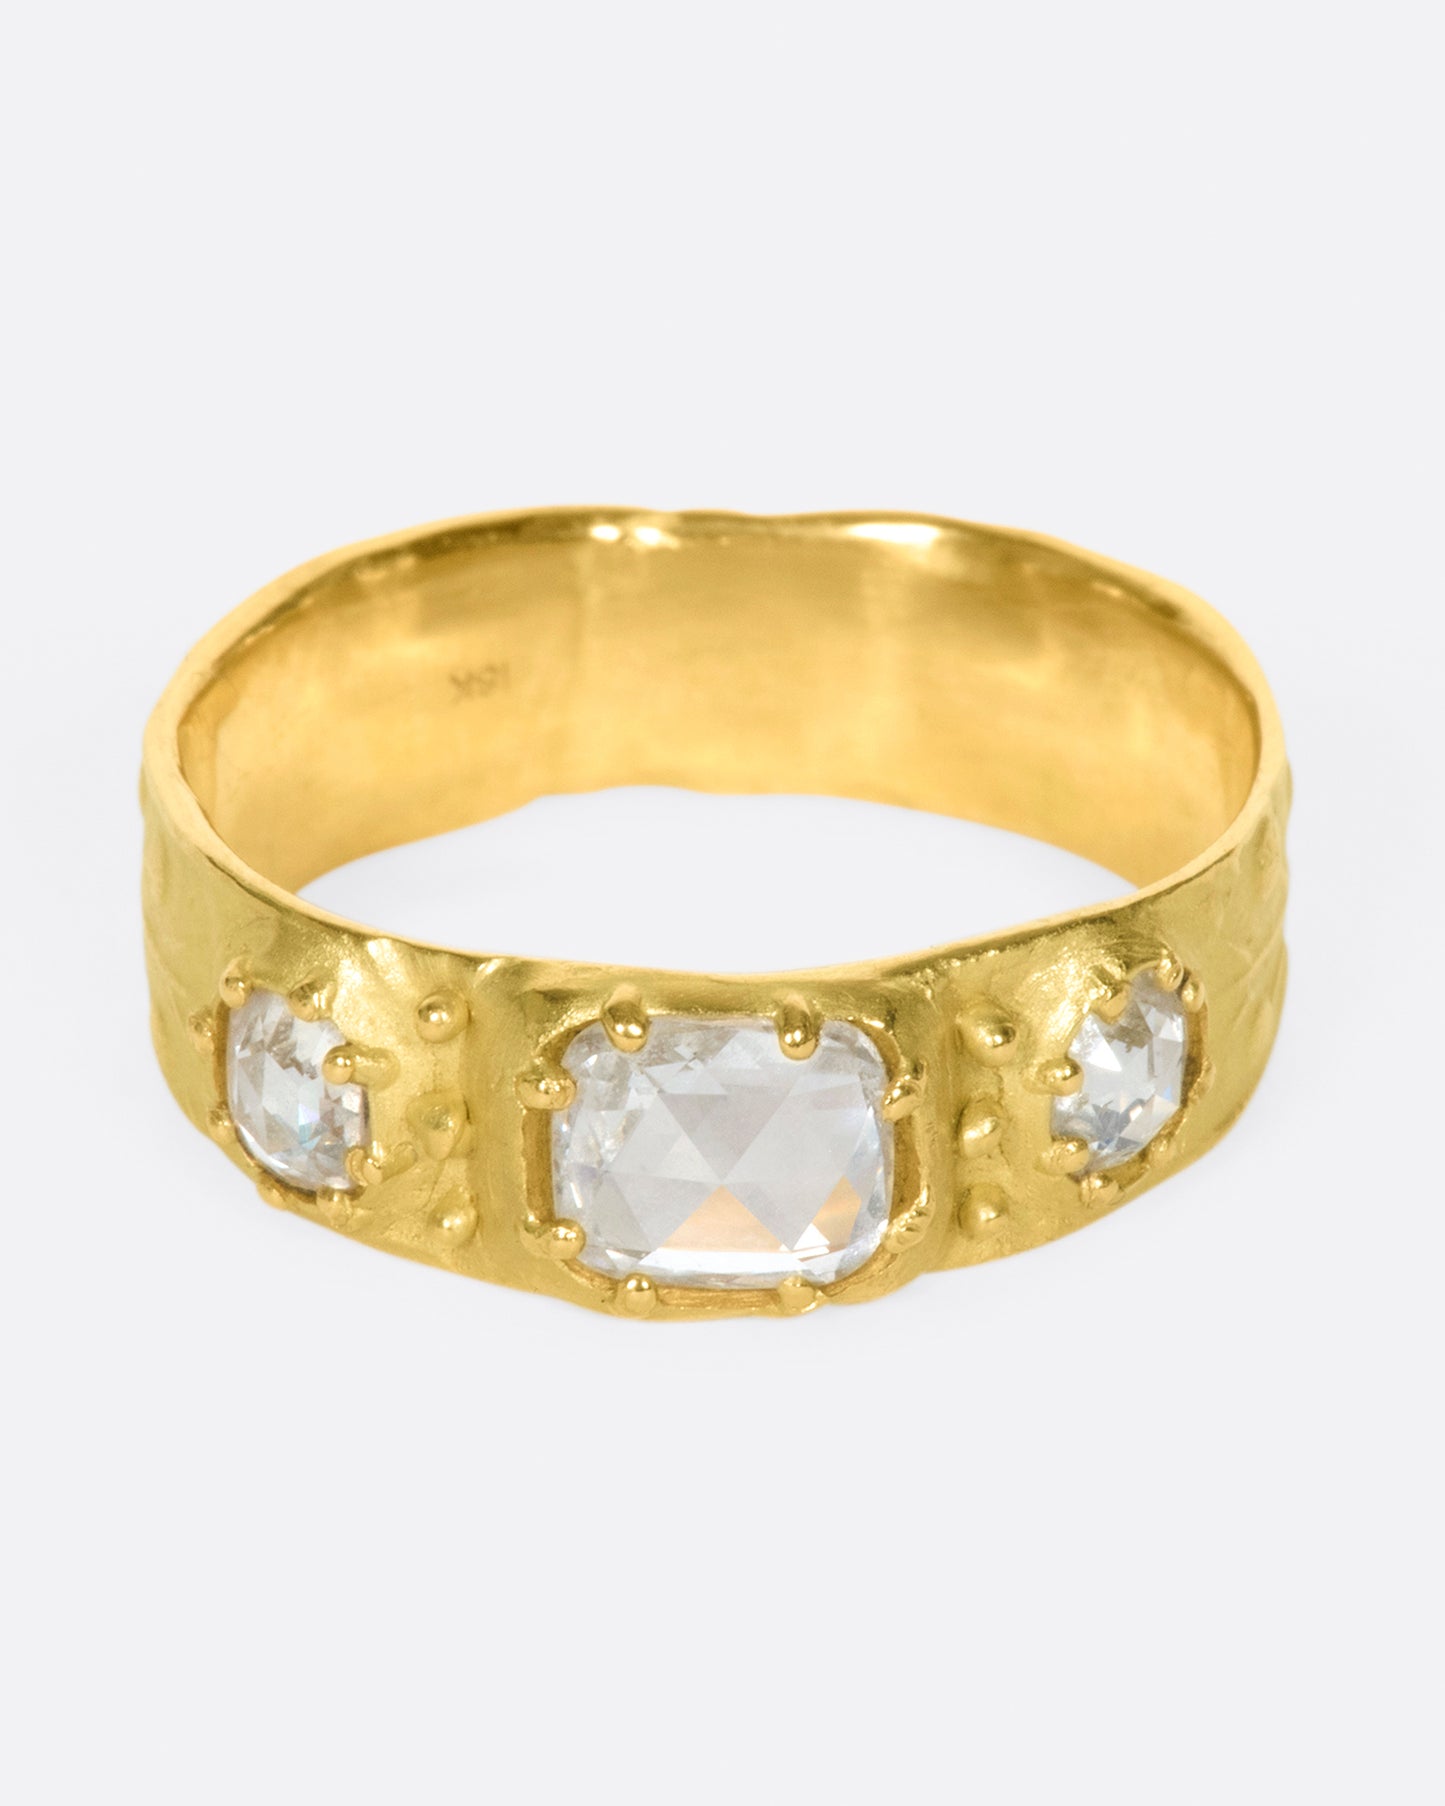 This thoughtfully detailed band has a sparkly rose-cut oval diamond in the center and rose-cut round diamonds on either side